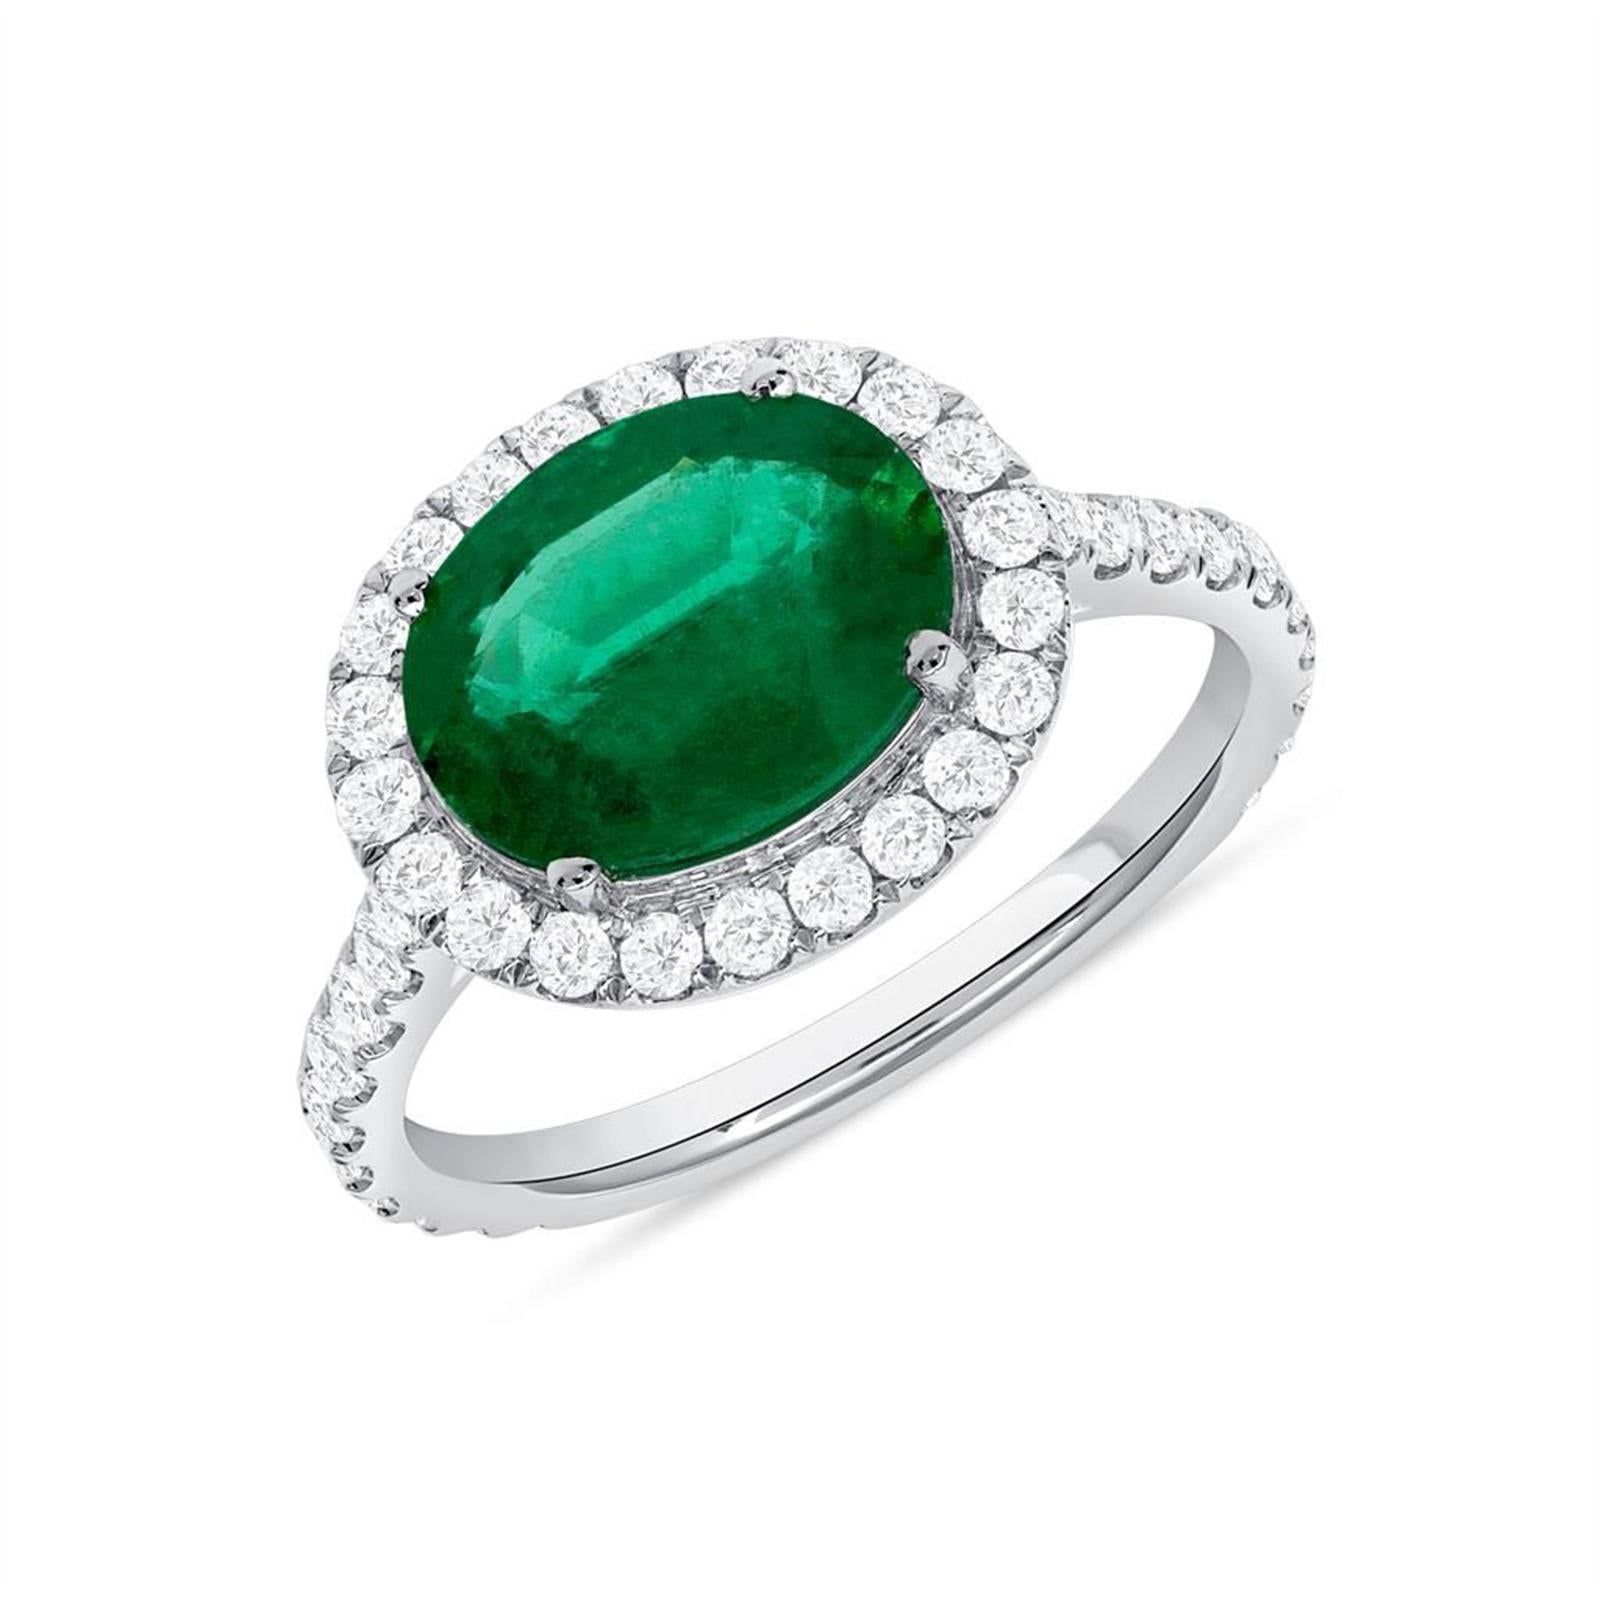 100% Authentic, 100% Customer Satisfaction

Height: 11.4 mm

Width: 2 mm

Size: 6.5 ( Contact Us for Sizing)

Metal:14K White Gold

Hallmarks: 14K

Total Weight: 2.32 Grams

Stone Type: 1.87 CT Natural Zambian Emerald & 0.65 CT Diamonds

Condition: